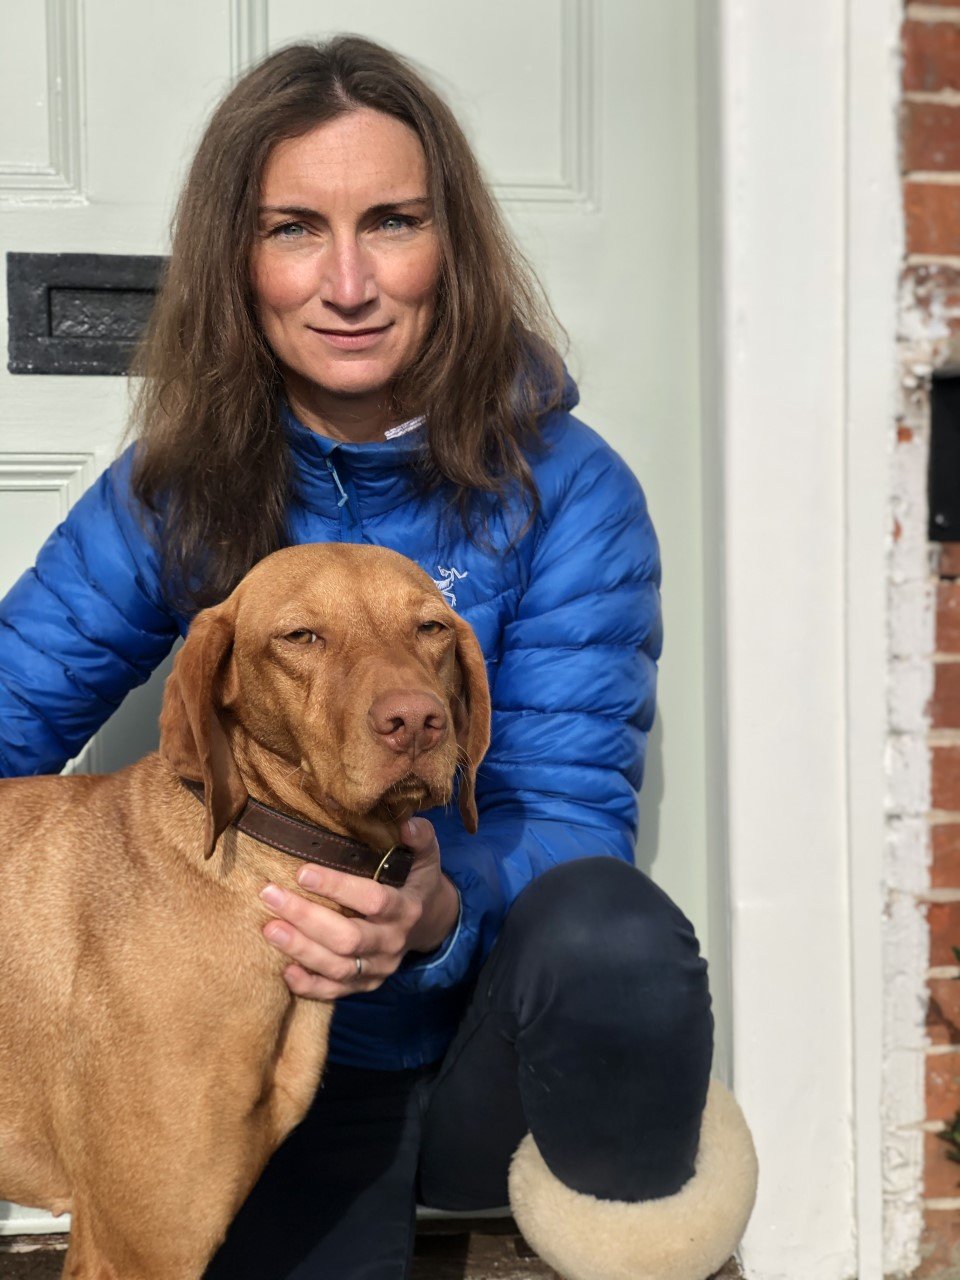 Alison is posing with a Labrador. She is our veterinarian who has over 20 years of experience and helps to design our recipes